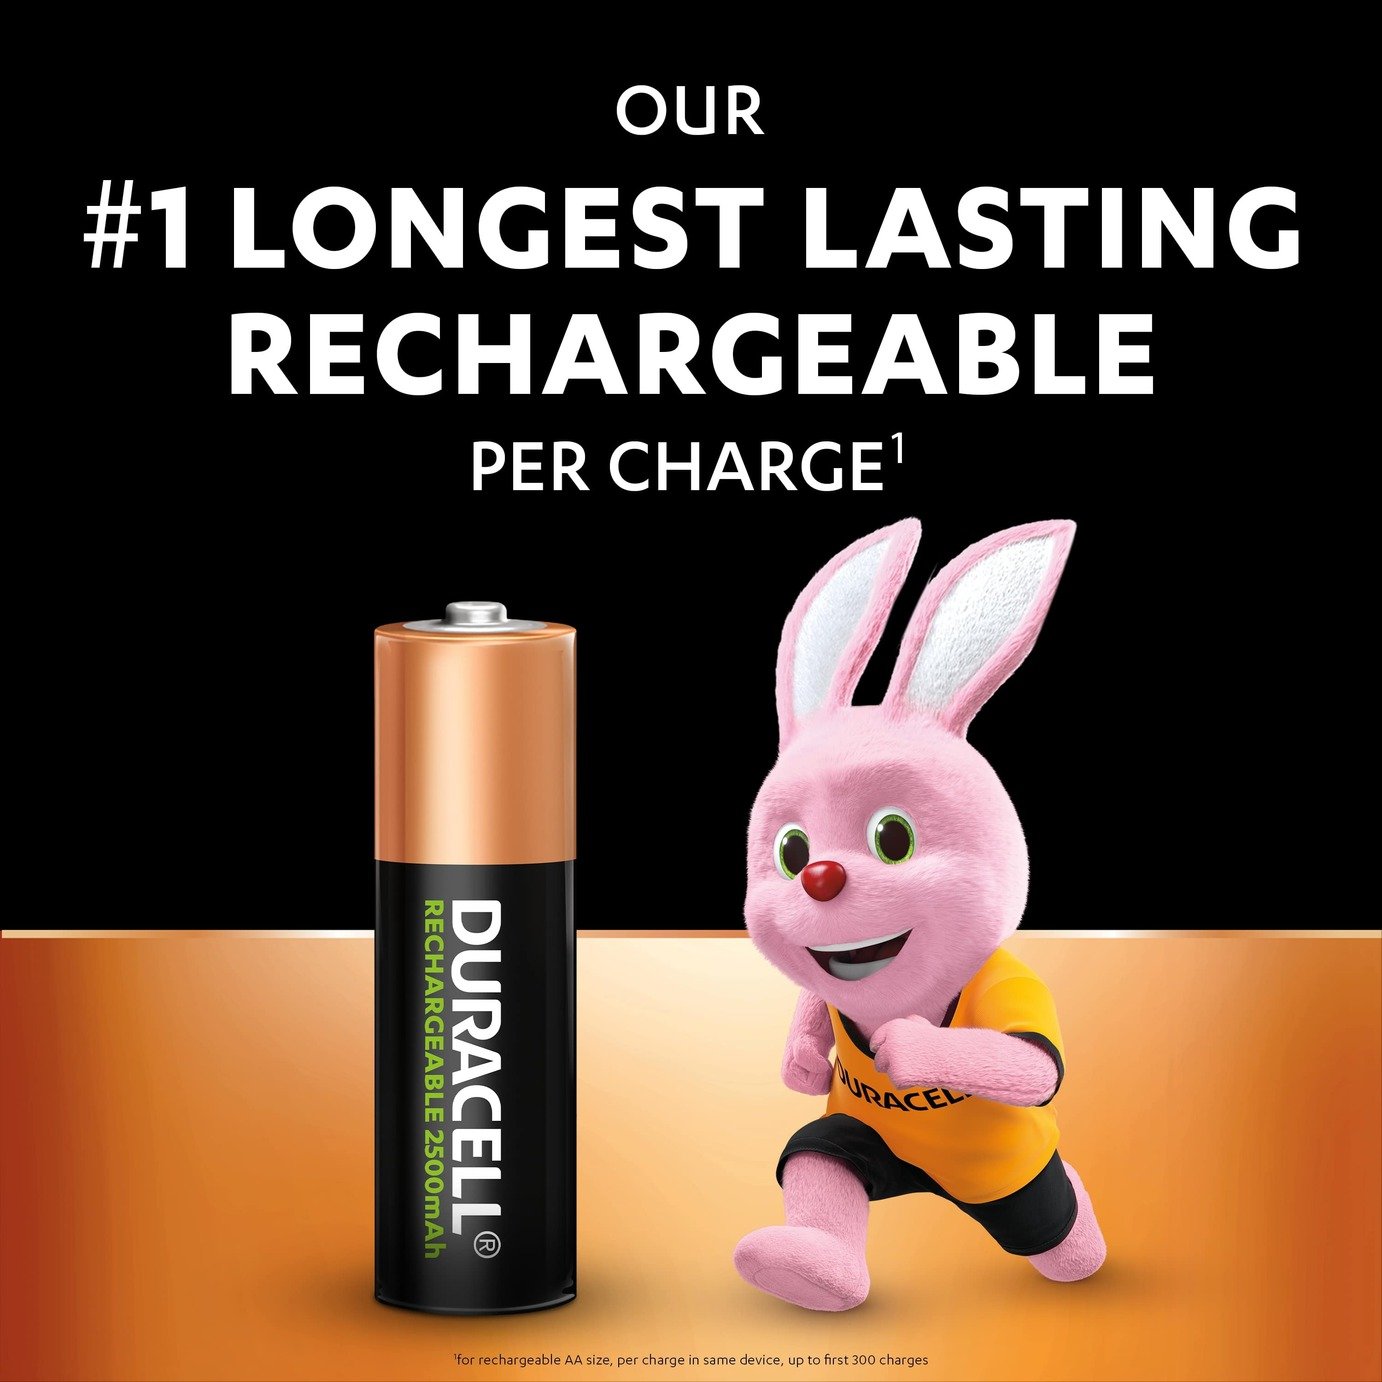 Duracell Rechargeable AA 2500mAh batteries Review